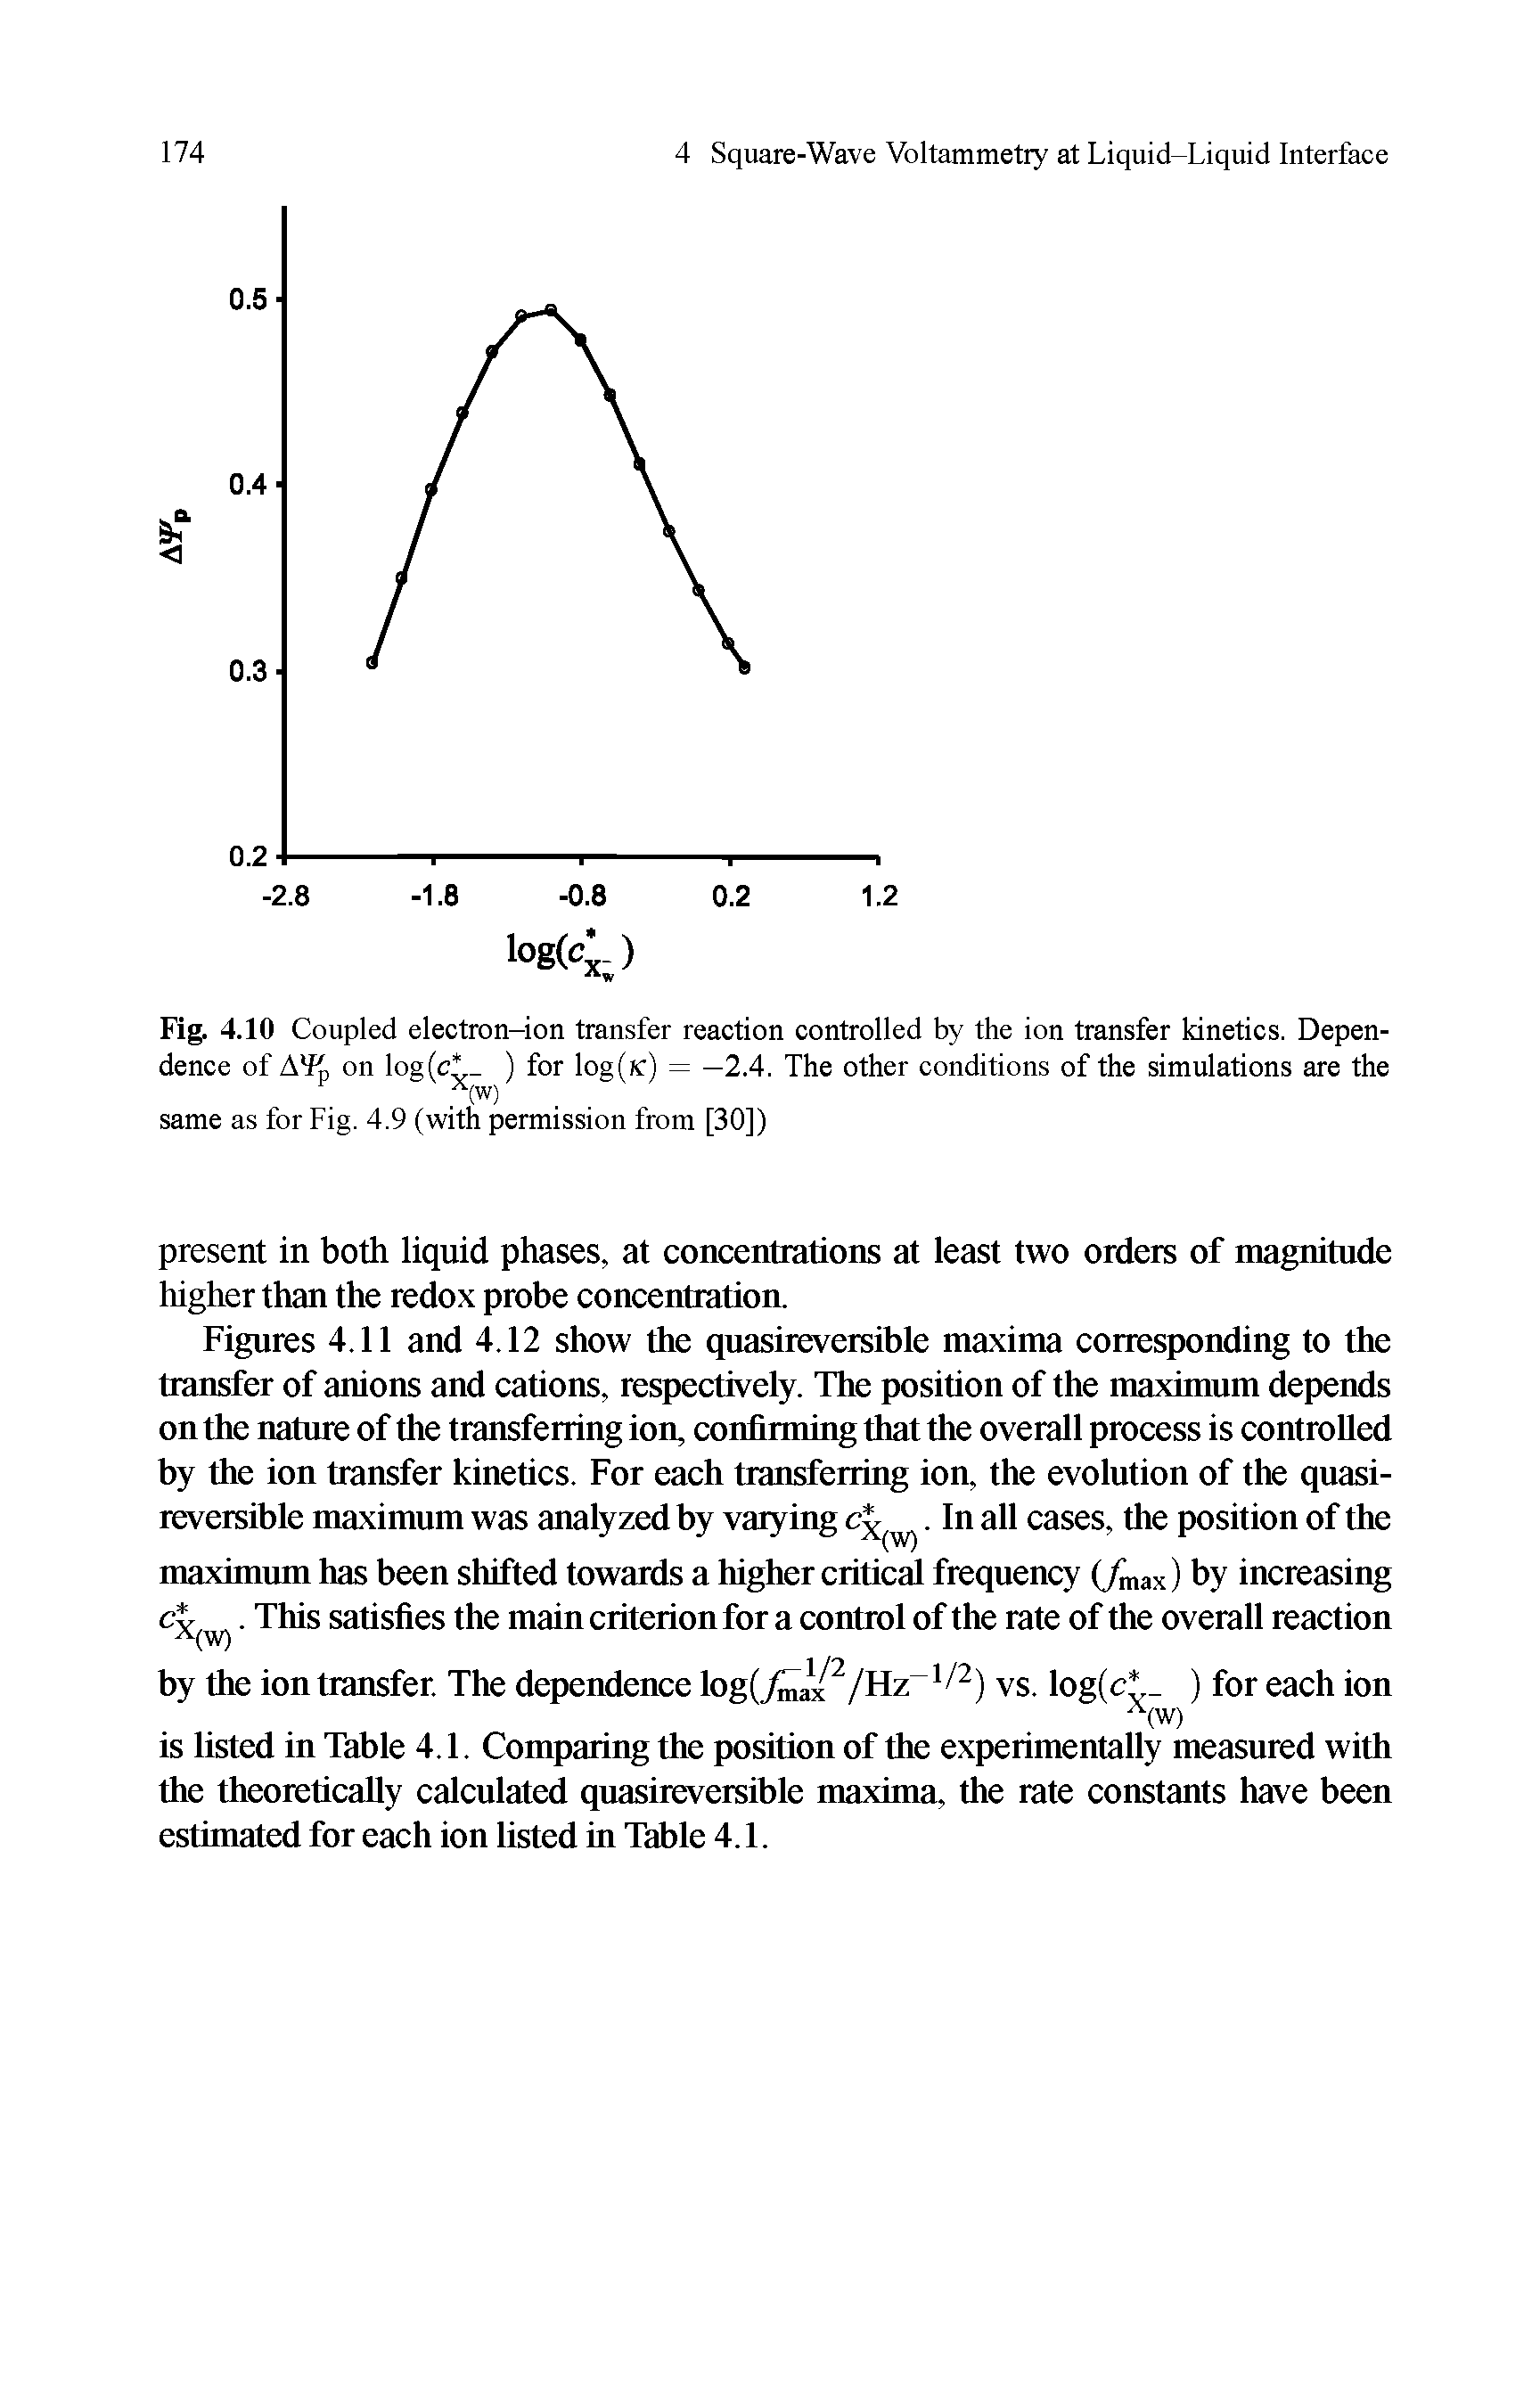 Figures 4.11 and 4.12 show the quasireversible maxima corresponding to the transfer of anions and cations, respectively. The position of the maximum depends on the nature of the transferring ion, confirming that the overall process is controlled by the ion transfer kinetics. For each transferring ion, the evolution of the quasireversible maximum was analyzed by varying. In all cases, the position of the...